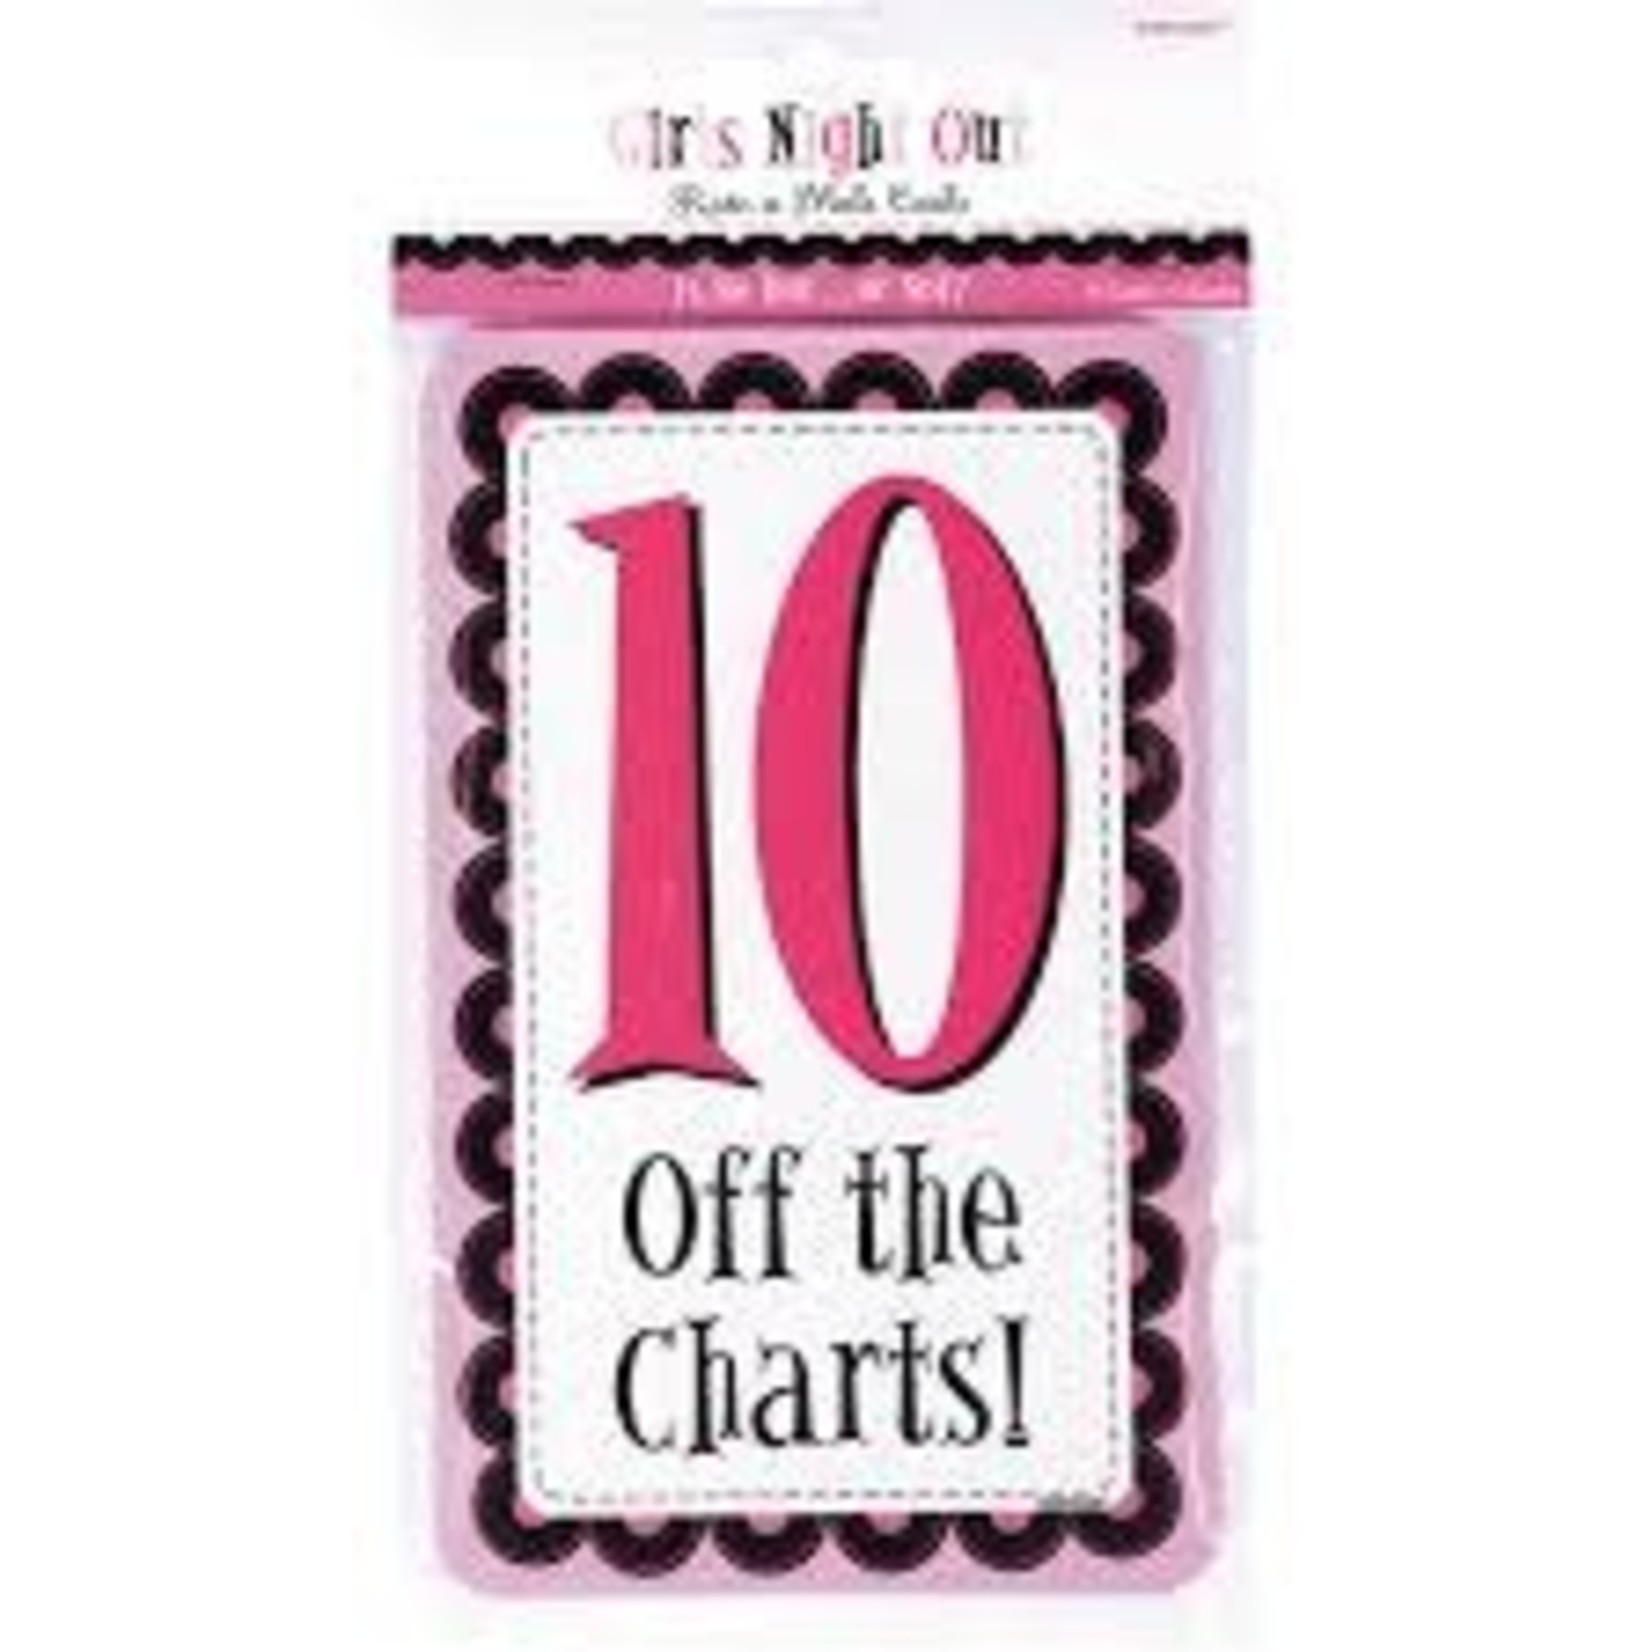 Amscan Girls Night Out Rating Cards - 10ct.